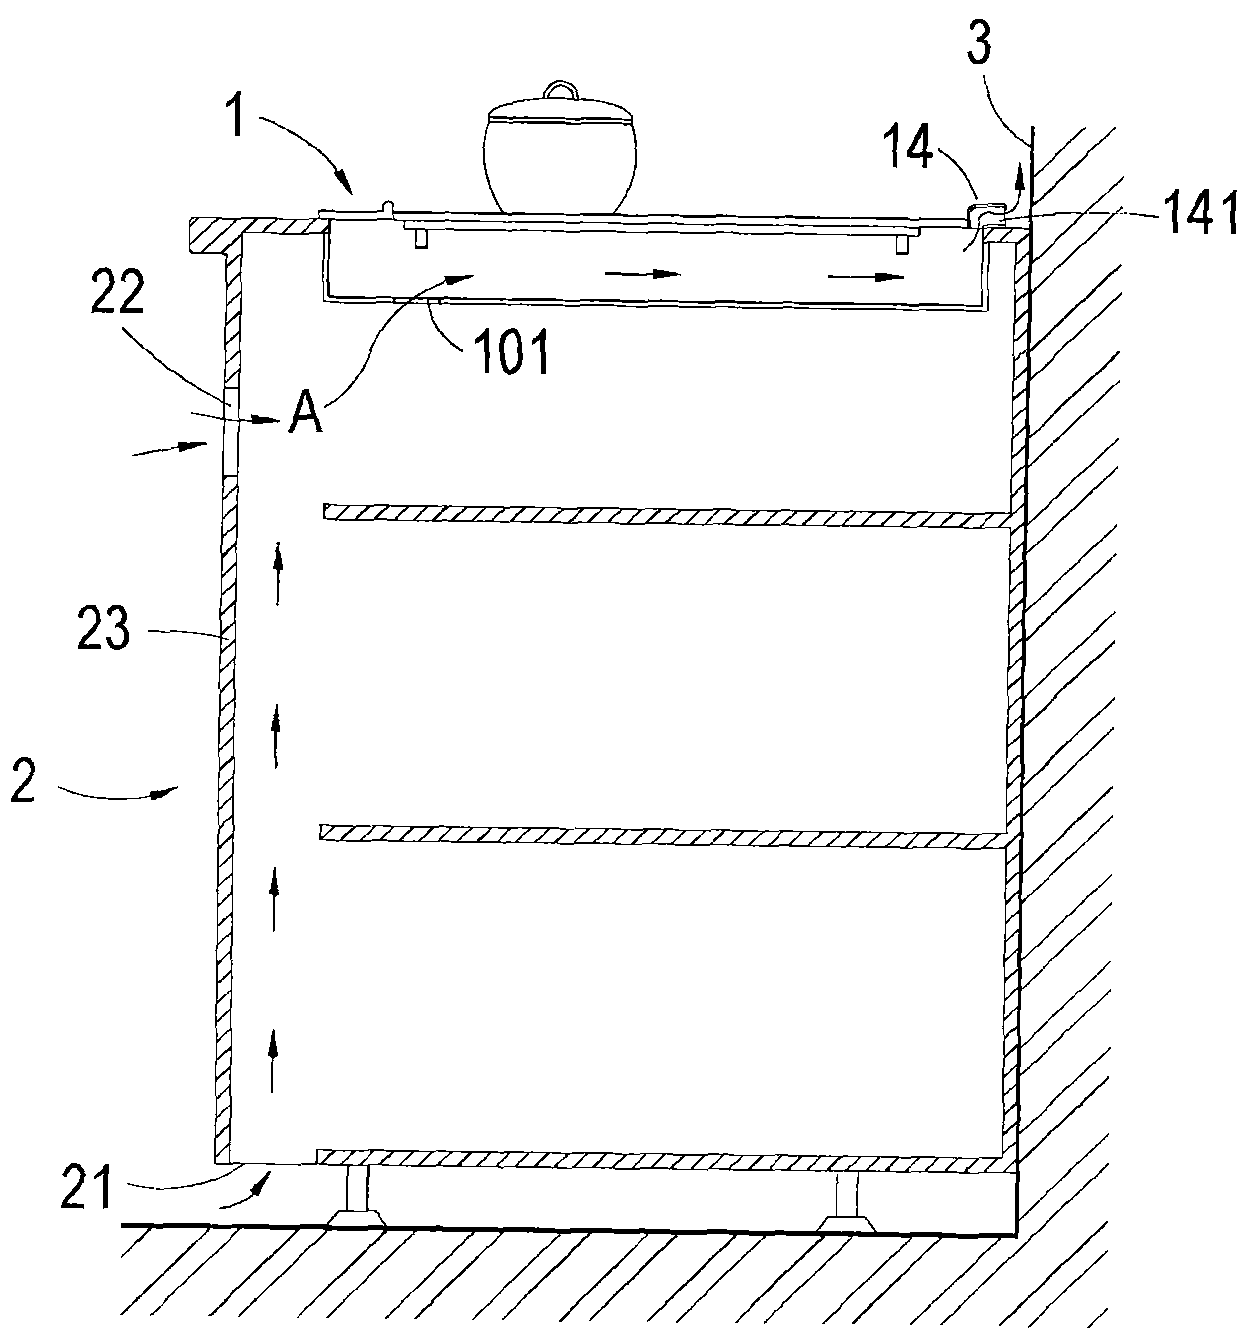 Electrical installation and radiating circulation system using same